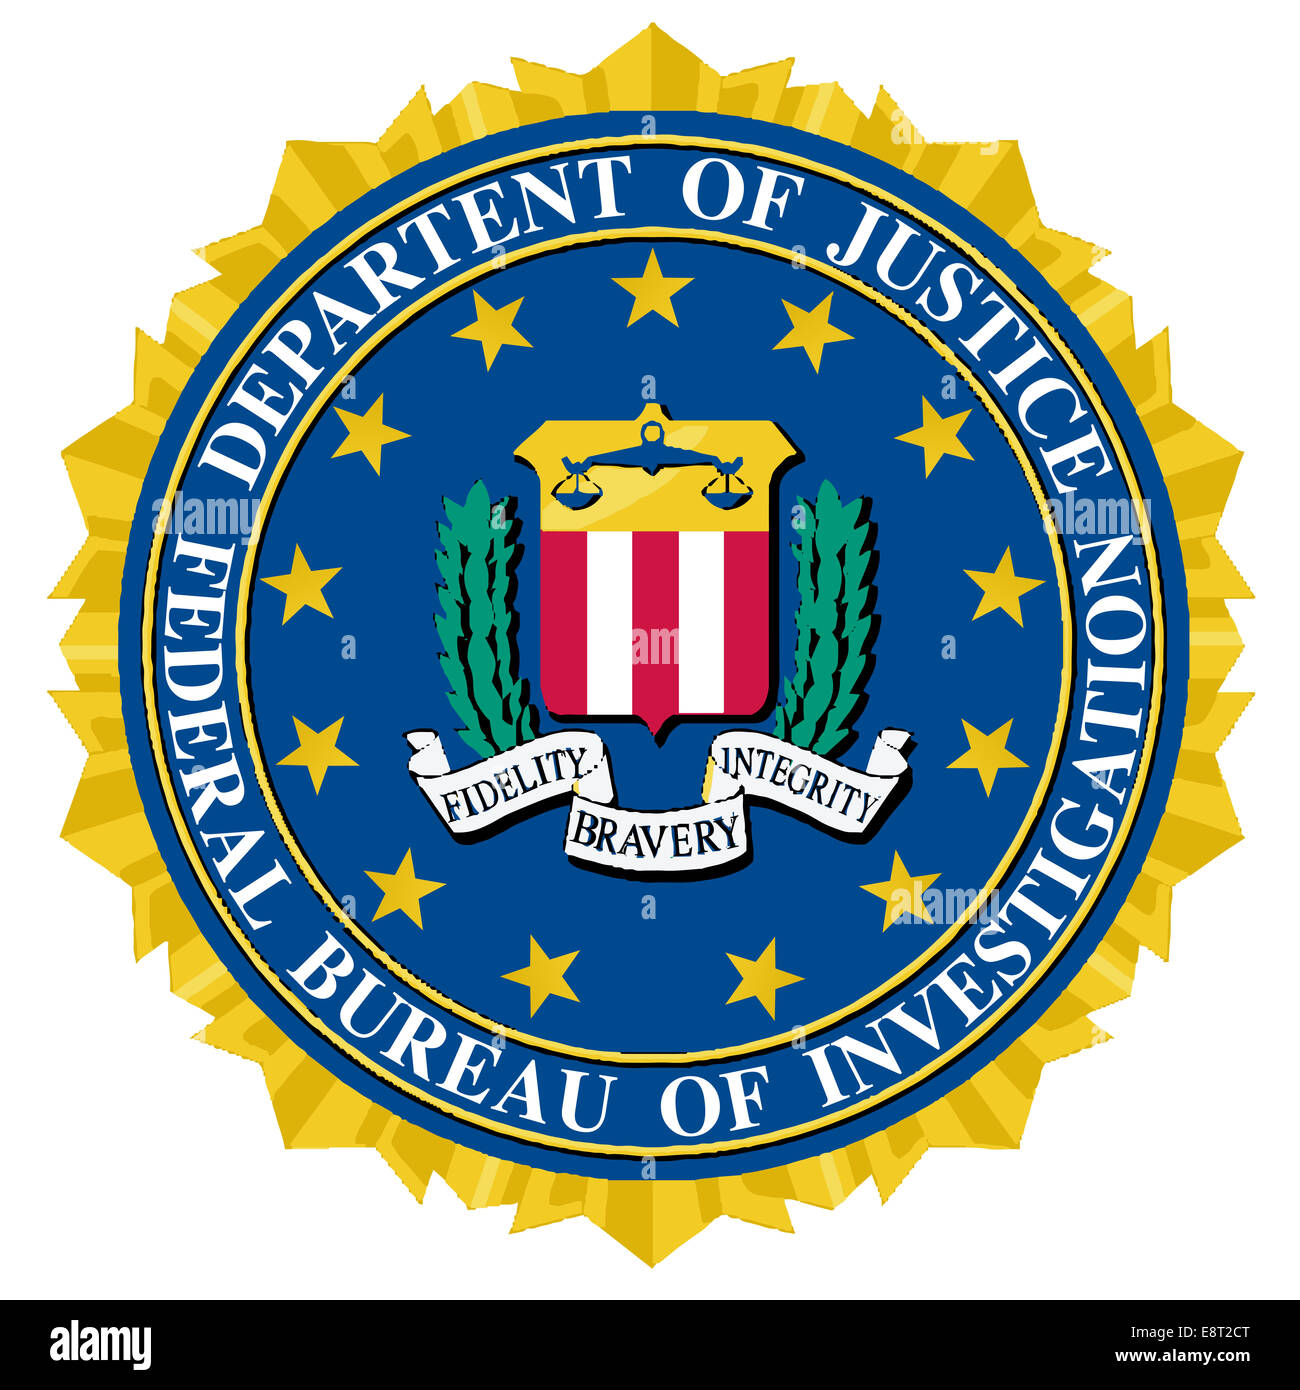 The seal of the Federal Bureau of Information over a white background Stock Photo